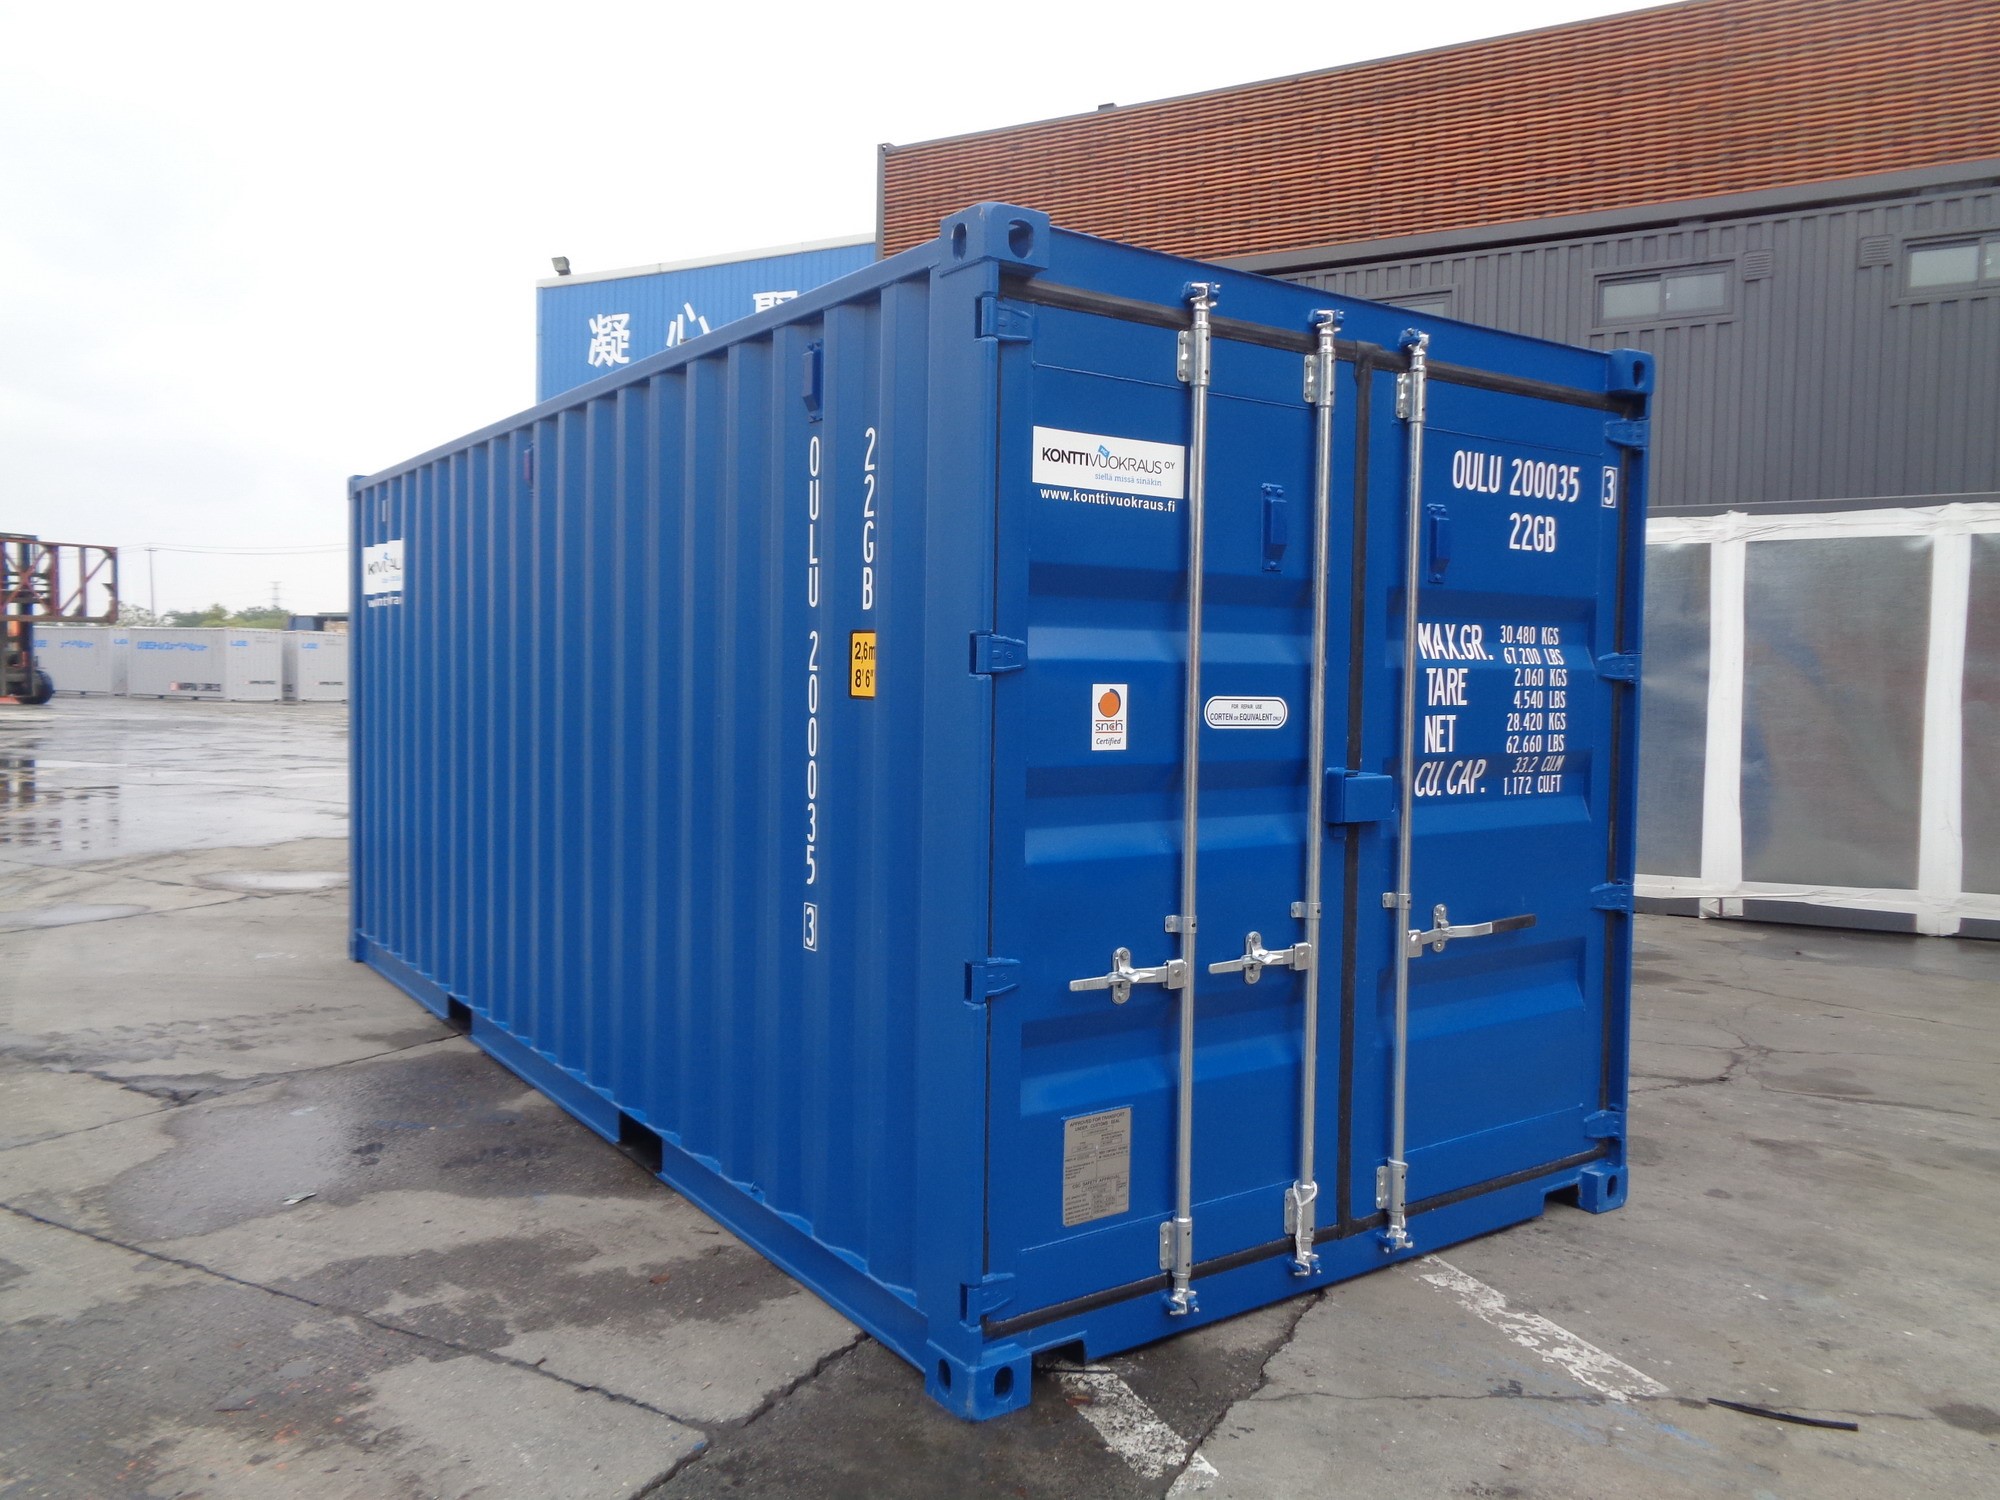 Choose From A Wide Range Of Shipping Containers Online